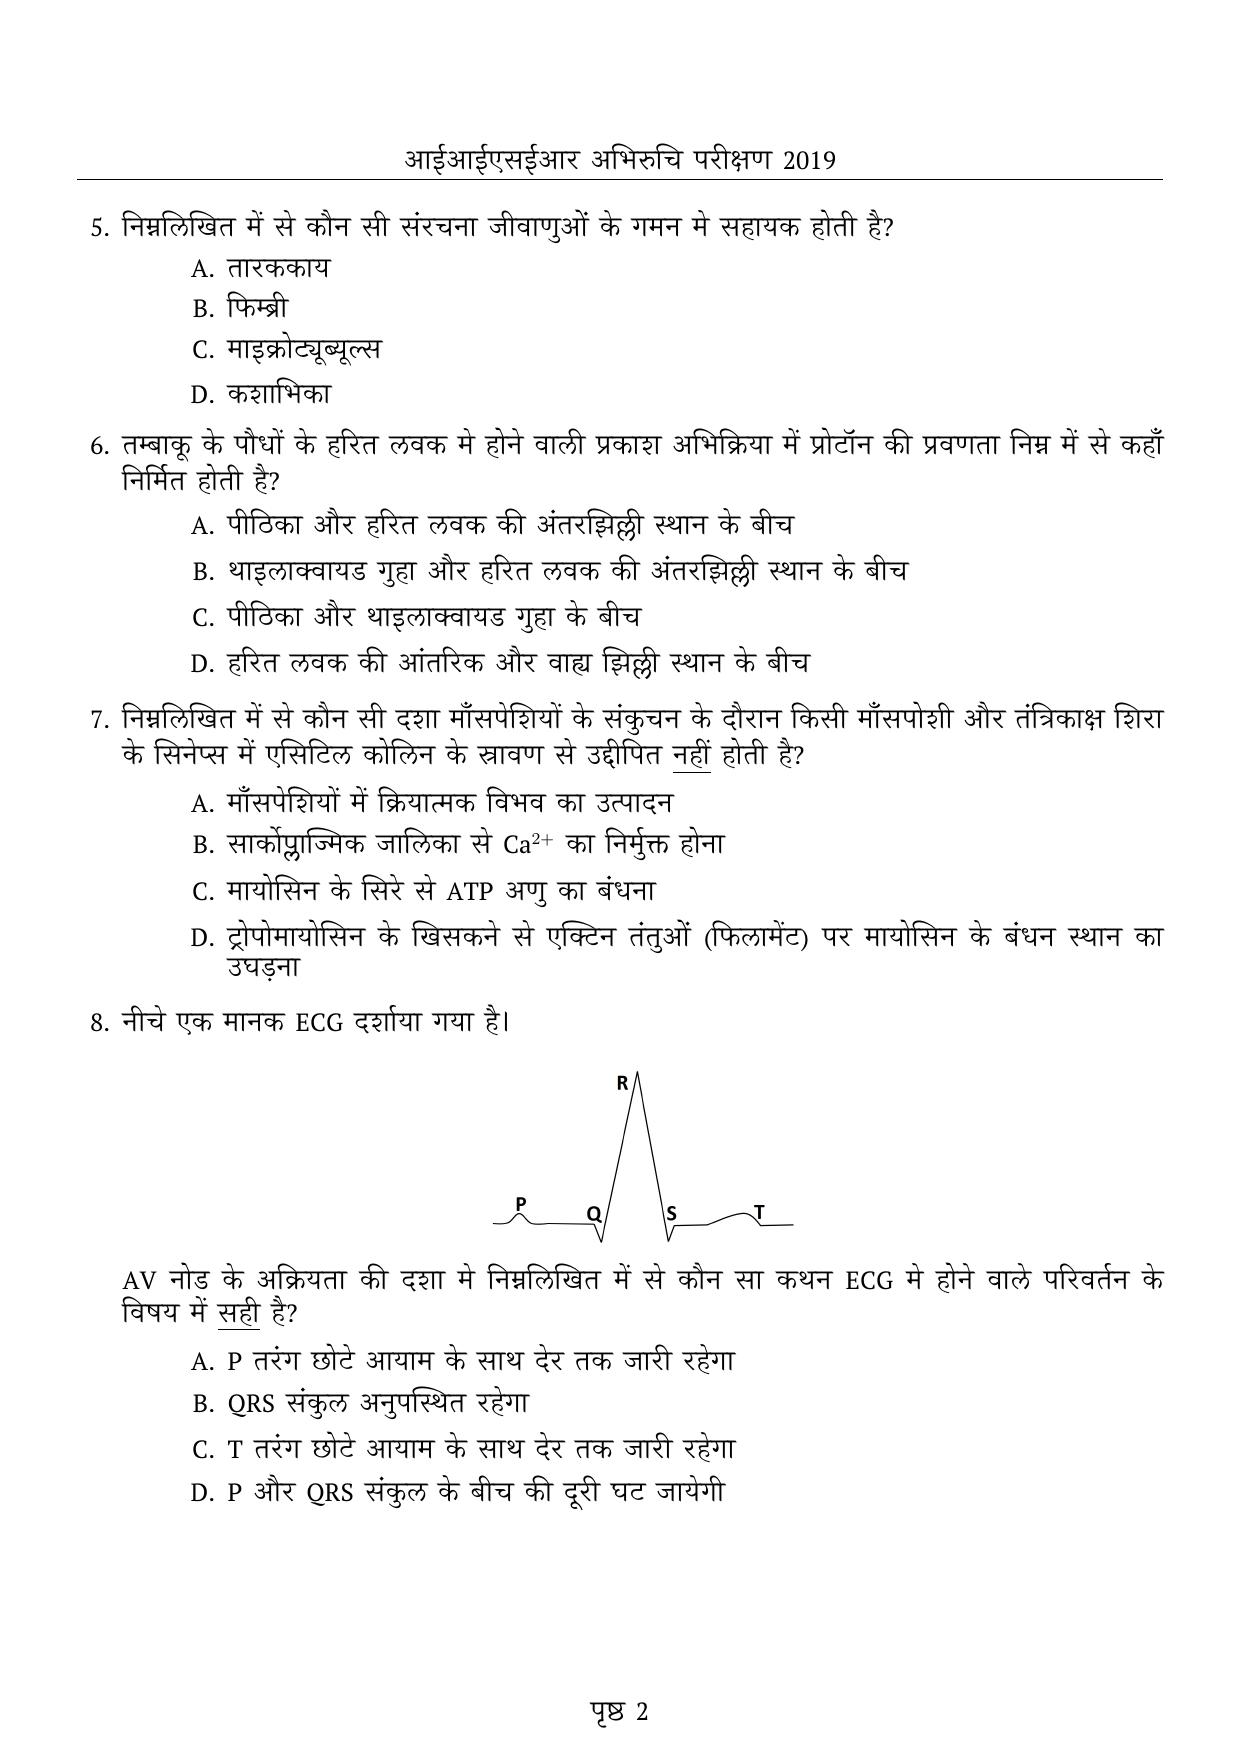 IISER Aptitude Test 2019 Hindi Question Paper - Page 2